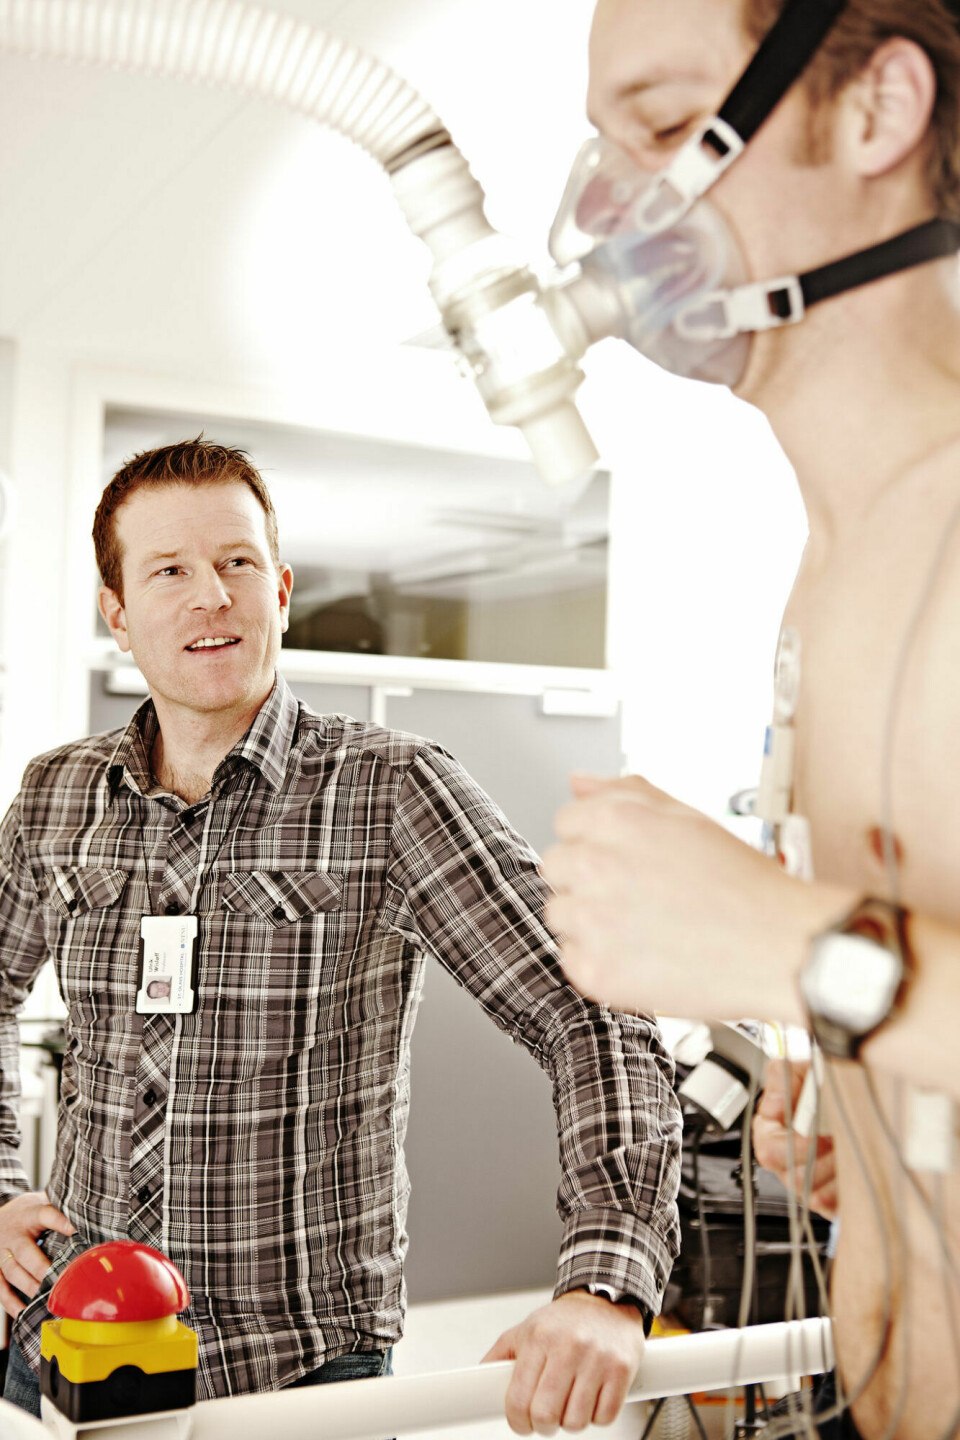 Ulrik Wisløff, left, watches as a runner undergoes VO2max testing as part of his research on the health effects of exercise.